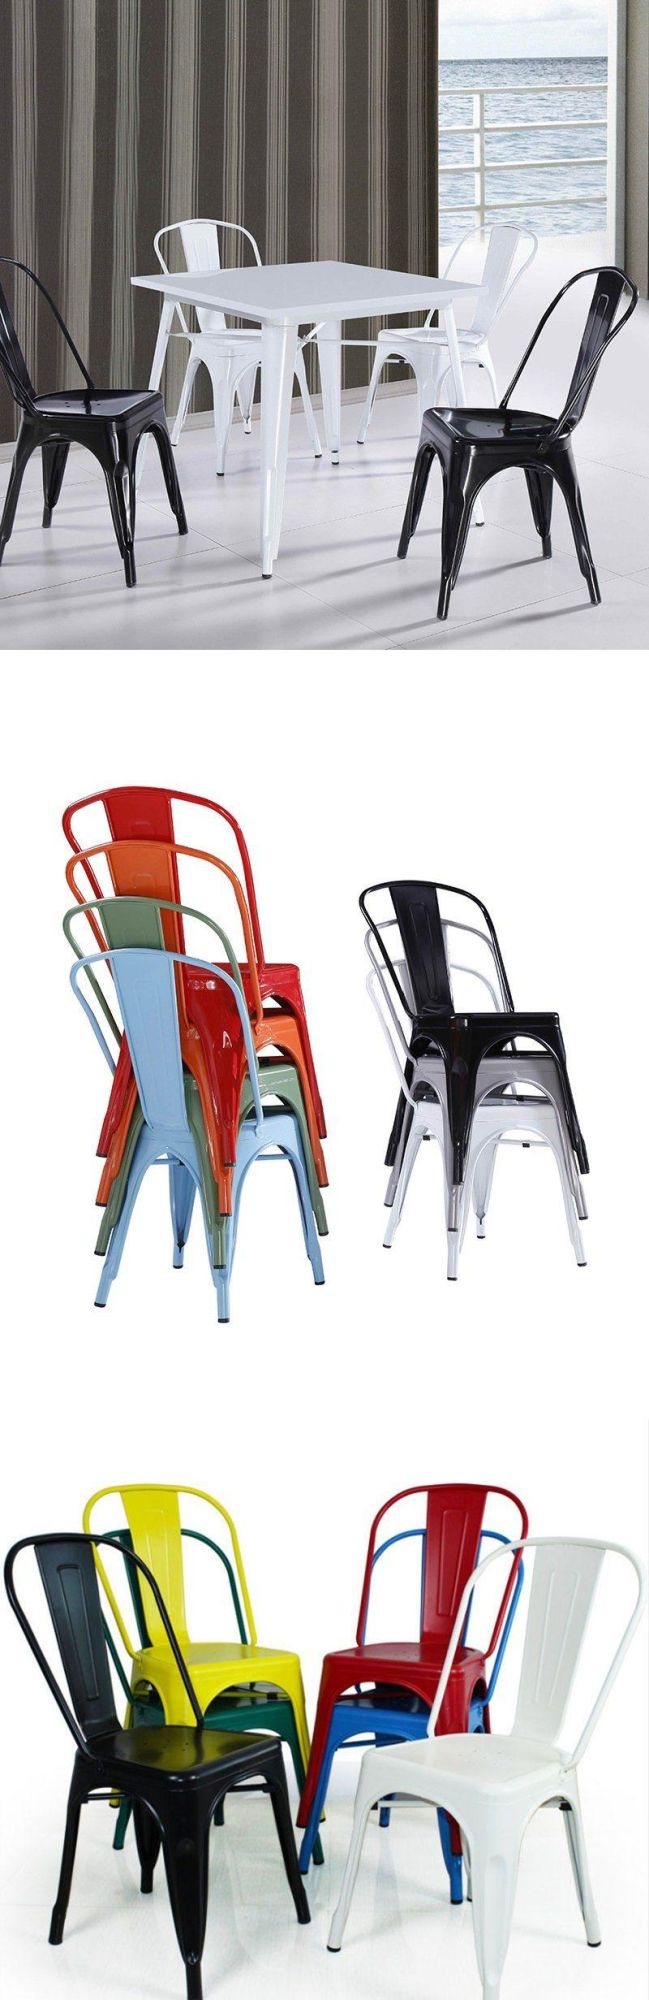 Classic Design Hotel Restaurant Outdoor Furniture Colorful Metal Chair for Cafe Bar